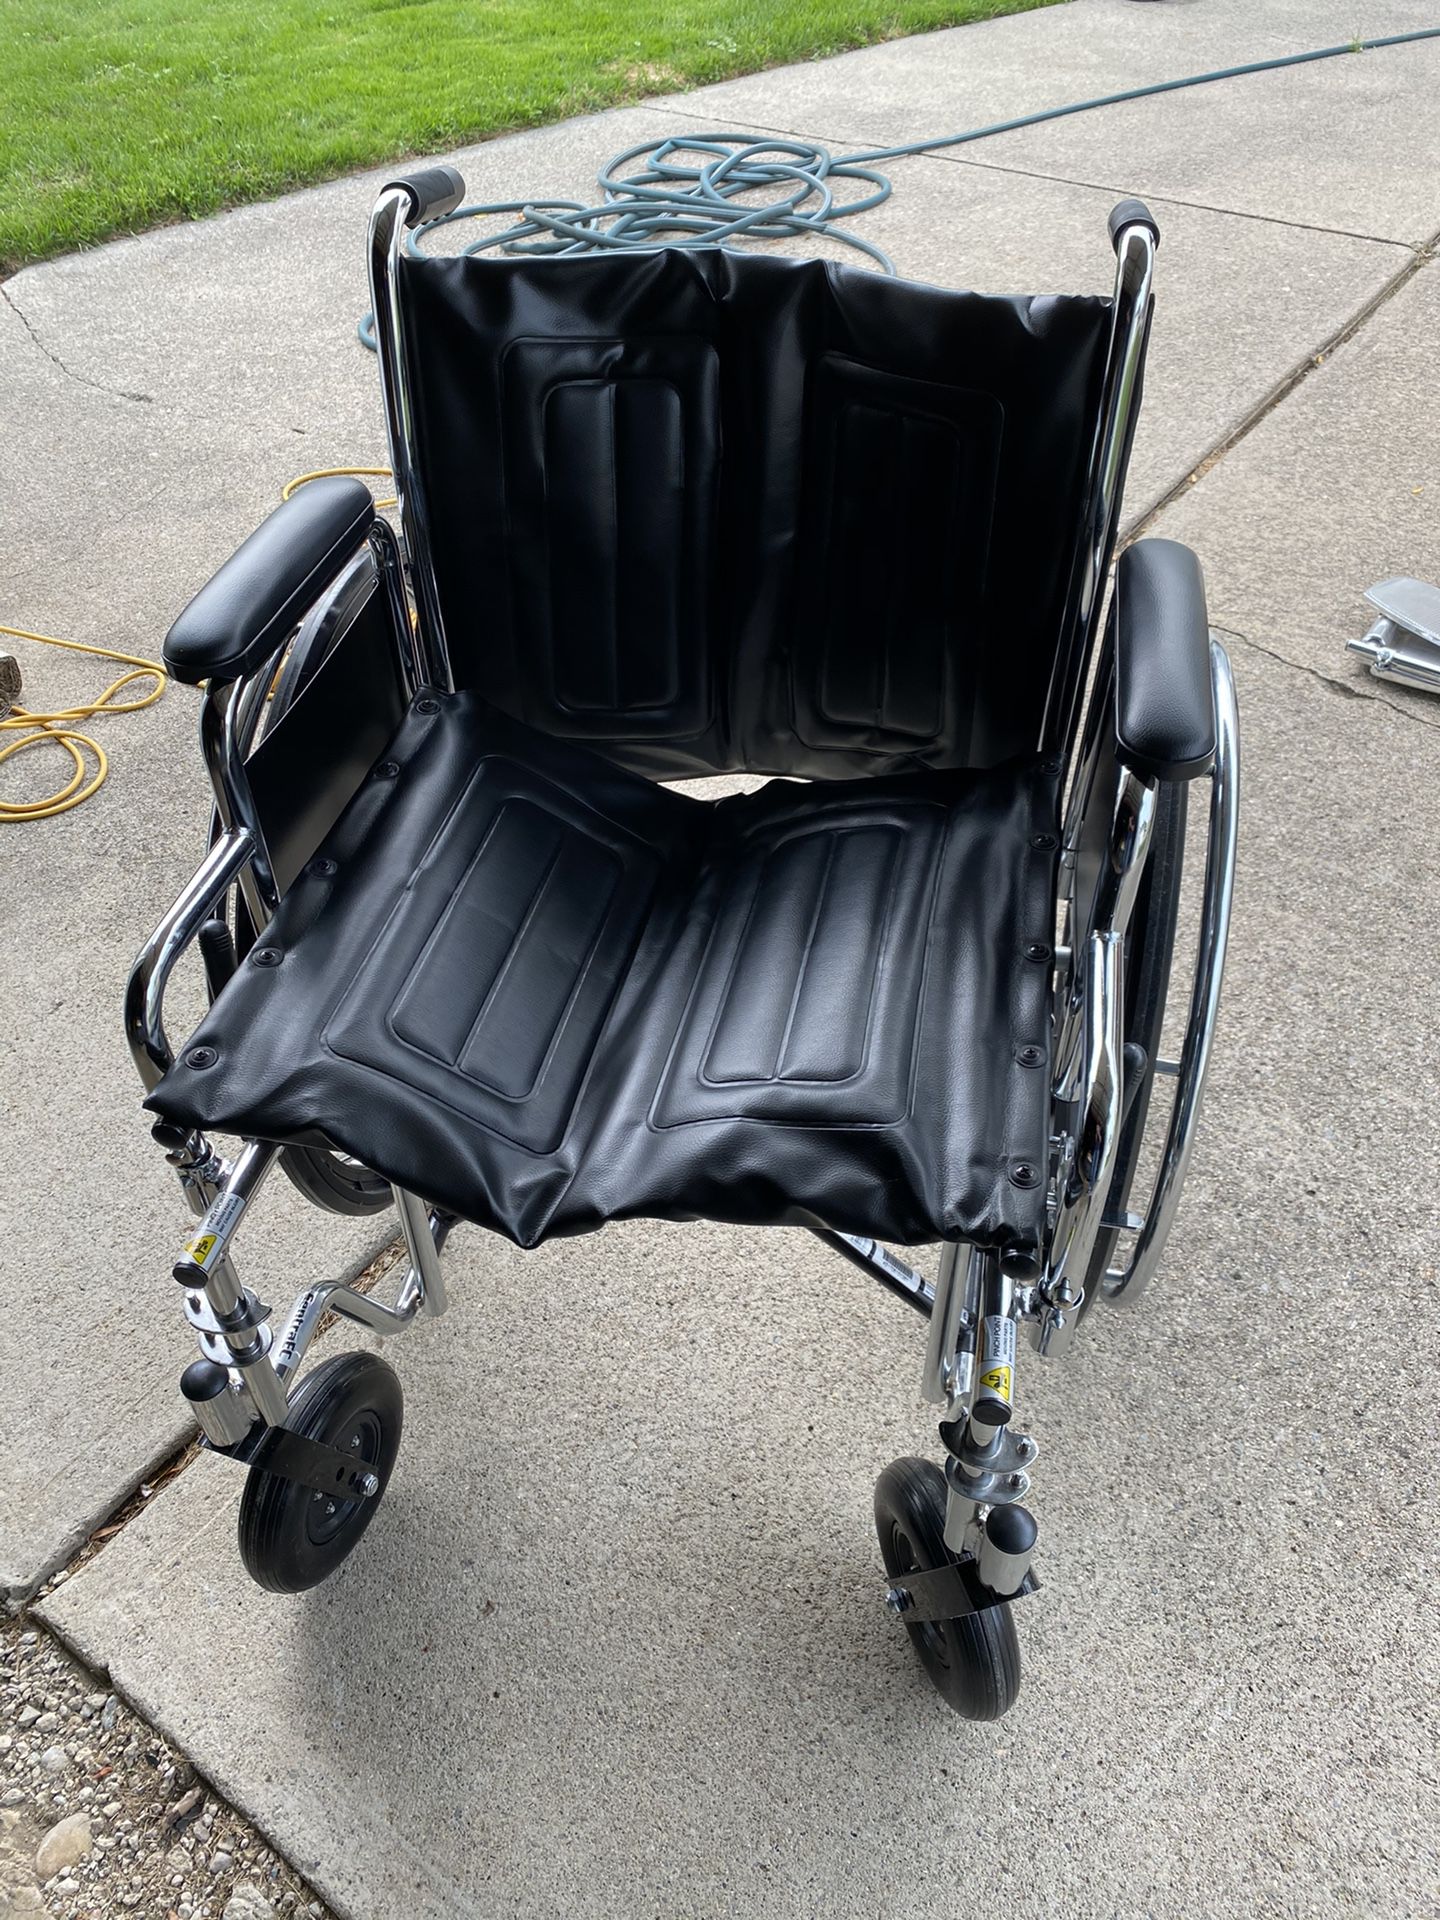 Extra wide wheelchair new never used 100.00 or BEST OFFER